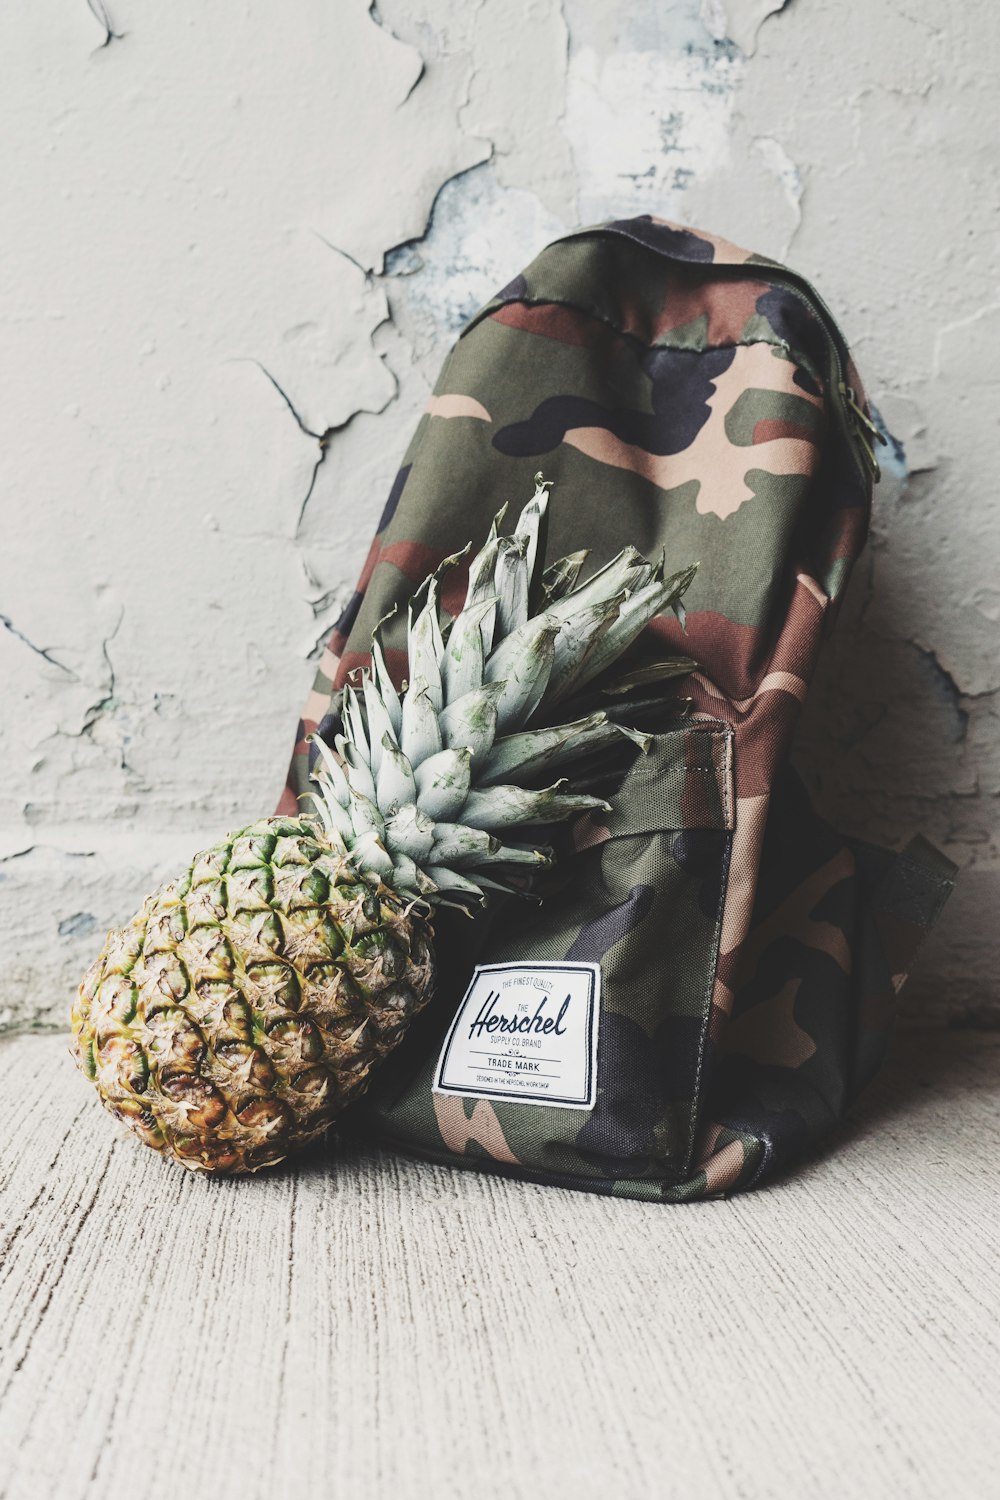 pineapple fruit leaning on camouflage backpack